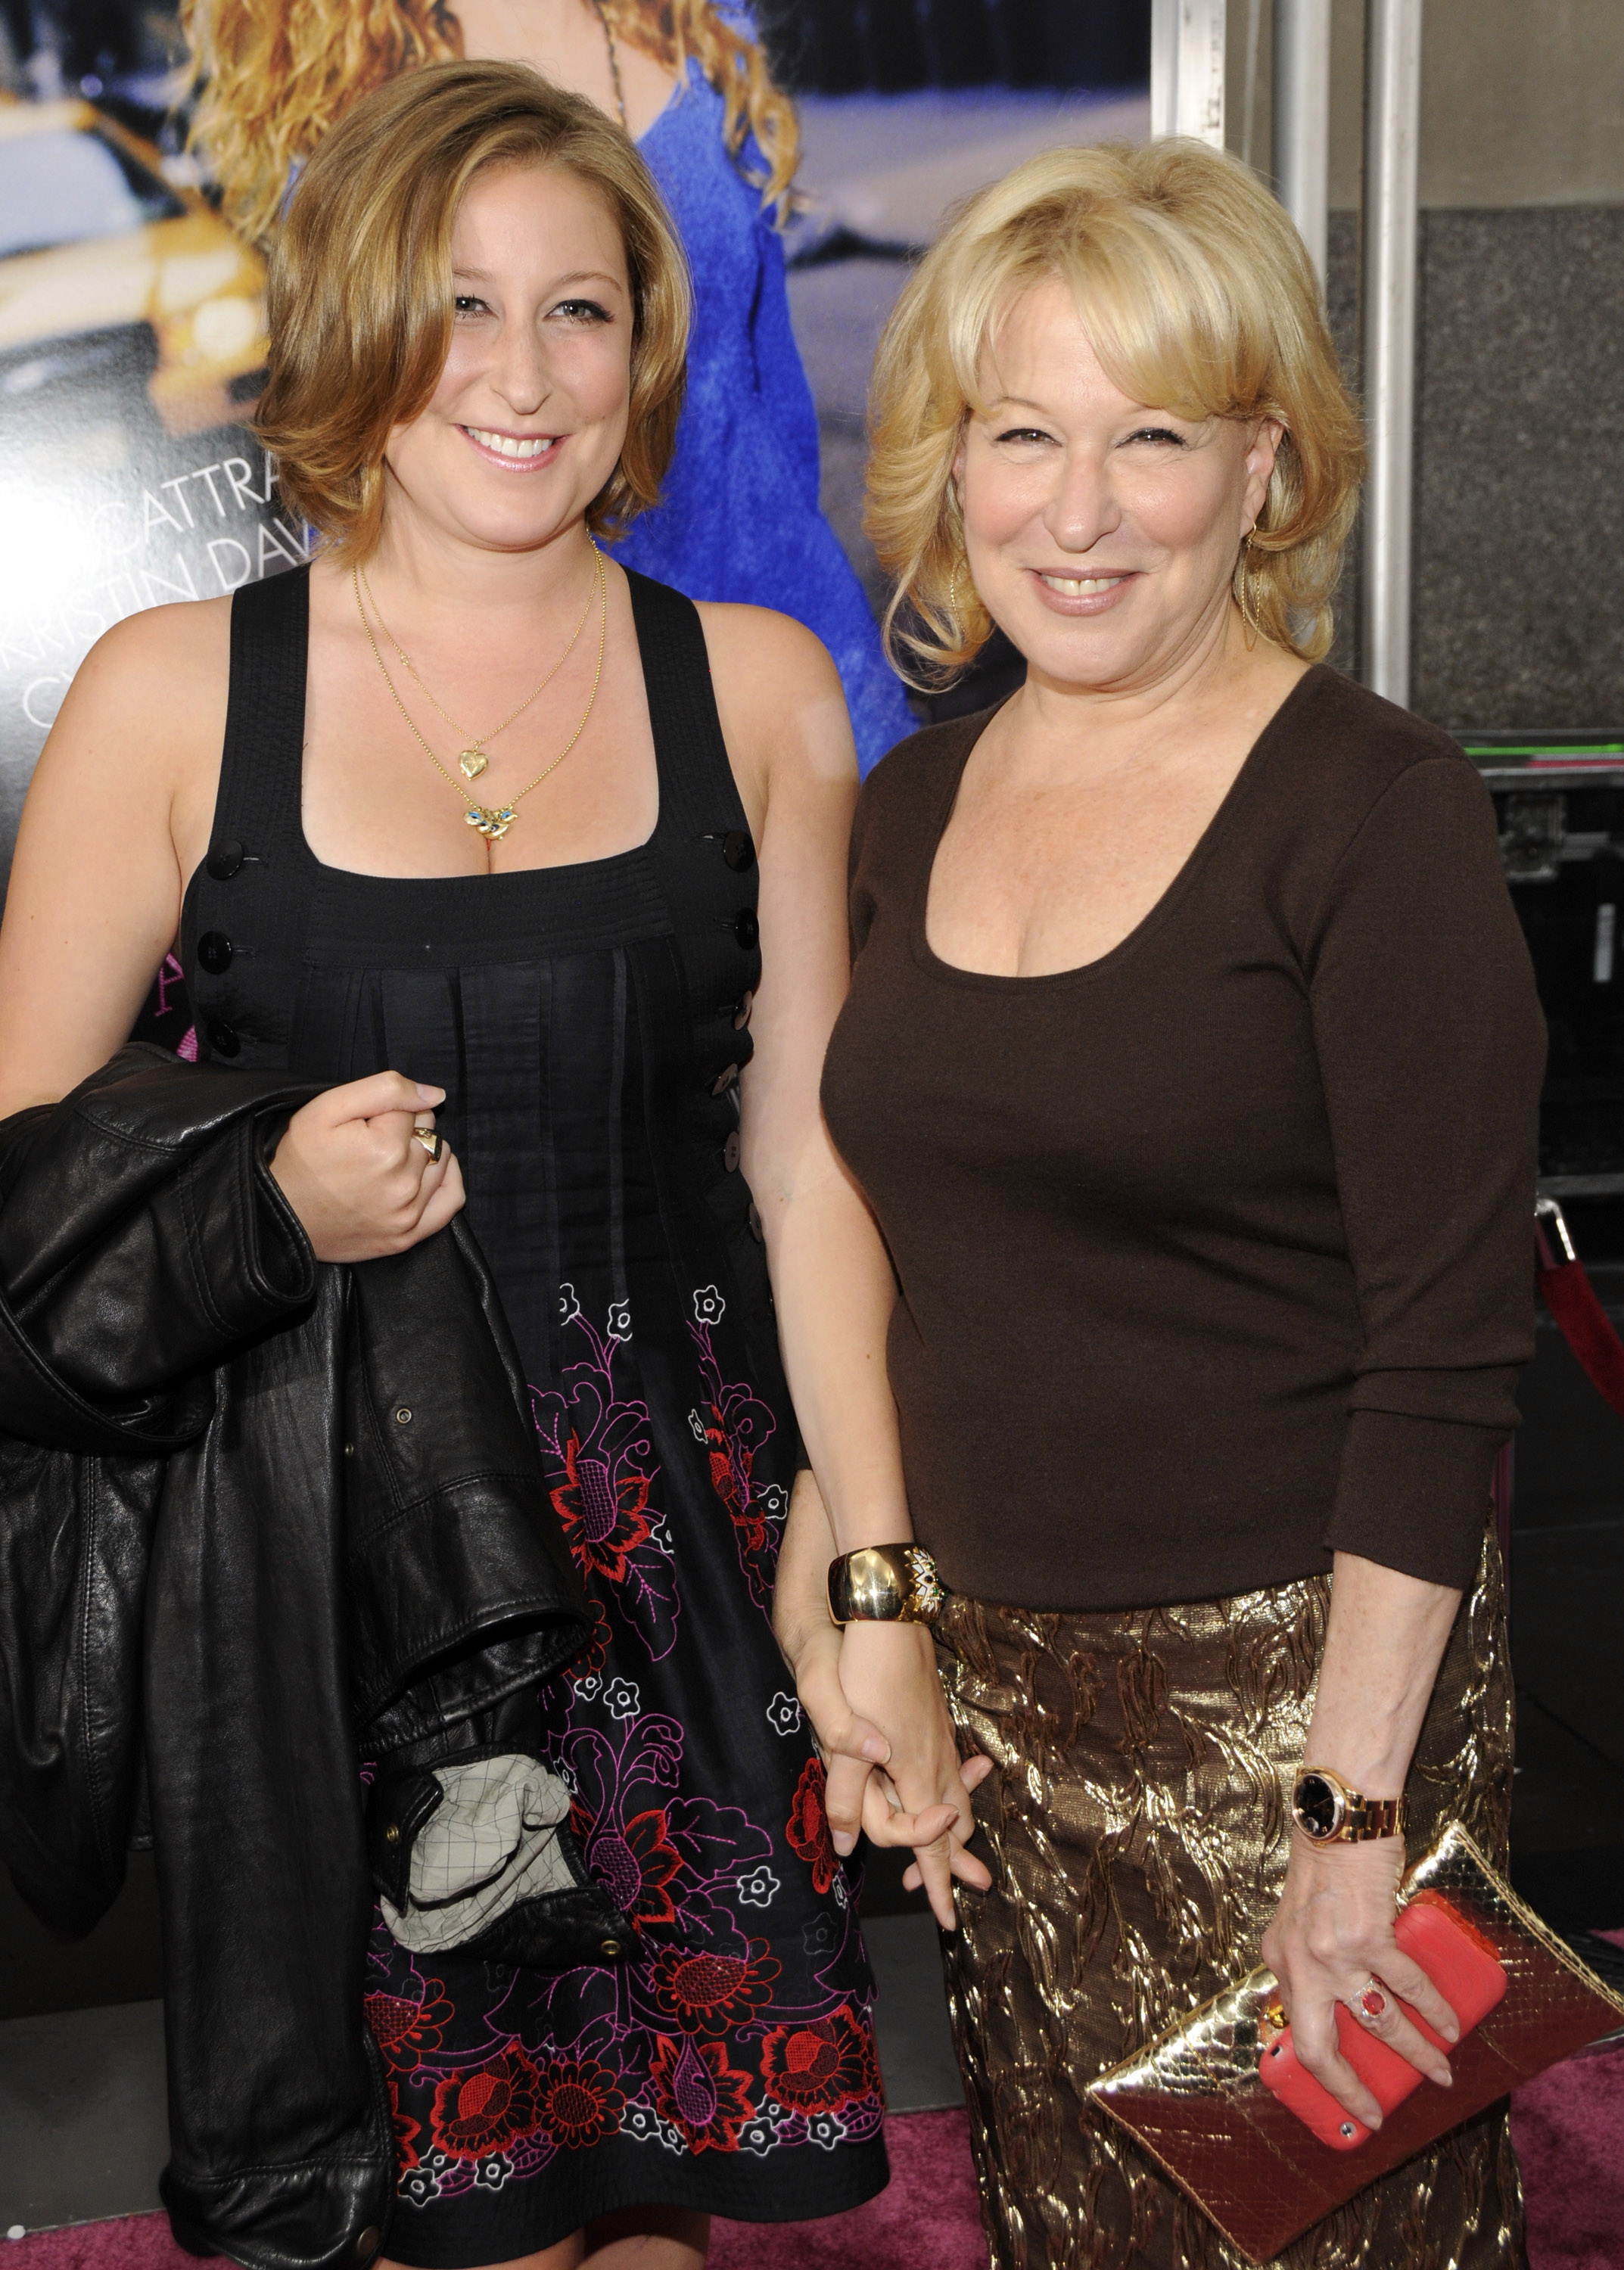 Sophie von Haselberg and mom Bette Midler attend the premiere of "Sex and the City: The Movie" on May 27, 2008 in New York City | Source: Getty Images